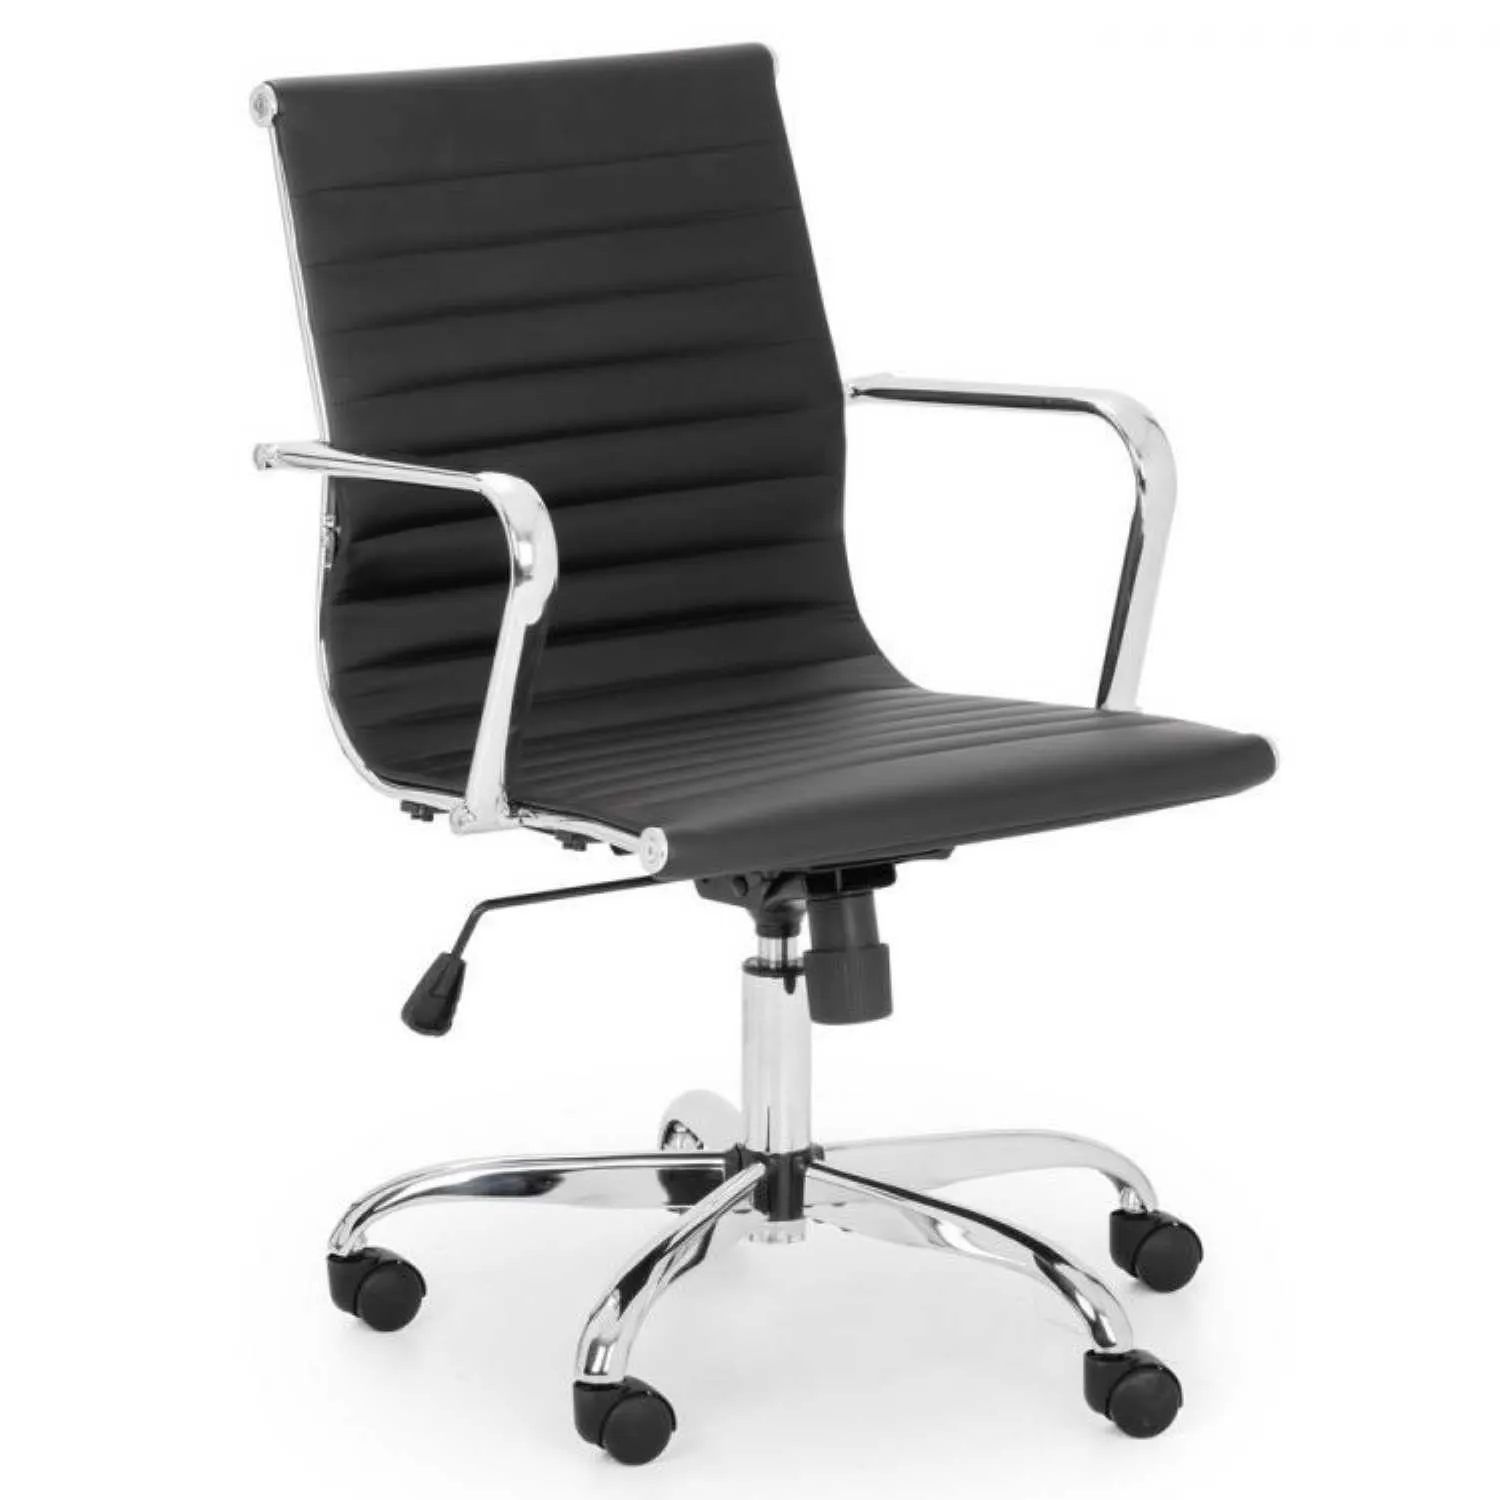 Comfy Swivel Office Chair Black Leather Chrome Frame Height Adjustable